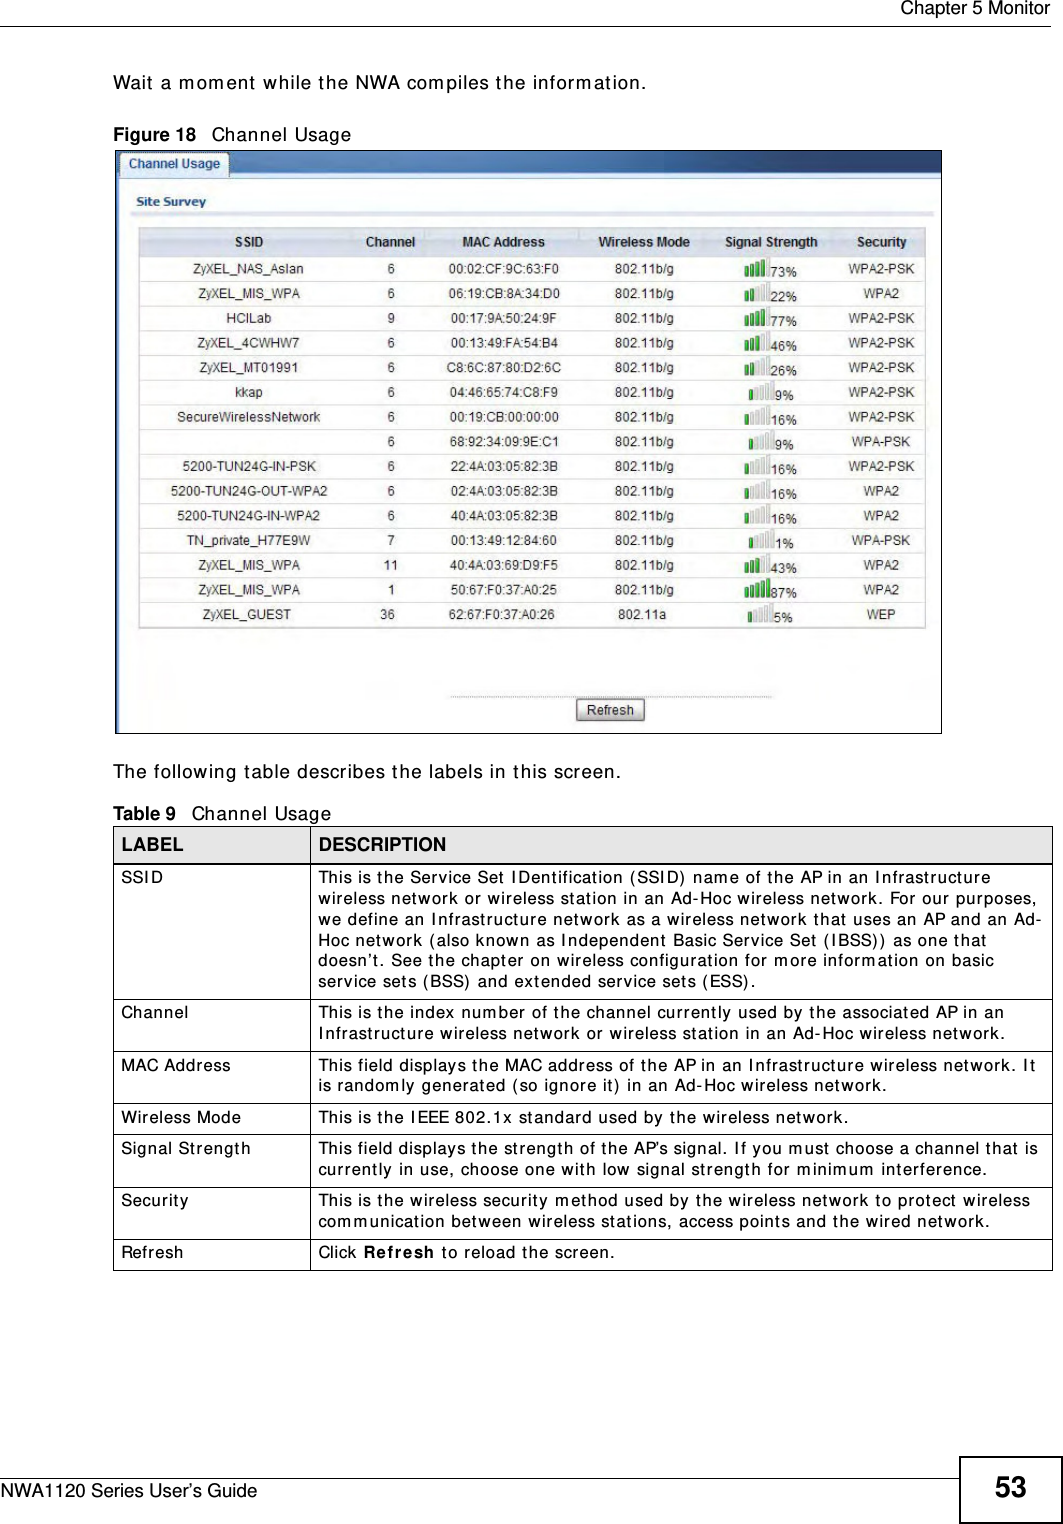  Chapter 5 MonitorNWA1120 Series User’s Guide 53Wait a moment while the NWA compiles the information.Figure 18   Channel Usage The following table describes the labels in this screen.Table 9   Channel UsageLABEL DESCRIPTIONSSID This is the Service Set IDentification (SSID) name of the AP in an Infrastructure wireless network or wireless station in an Ad-Hoc wireless network. For our purposes, we define an Infrastructure network as a wireless network that uses an AP and an Ad-Hoc network (also known as Independent Basic Service Set (IBSS)) as one that doesn’t. See the chapter on wireless configuration for more information on basic service sets (BSS) and extended service sets (ESS).Channel This is the index number of the channel currently used by the associated AP in an Infrastructure wireless network or wireless station in an Ad-Hoc wireless network.MAC Address This field displays the MAC address of the AP in an Infrastructure wireless network. It is randomly generated (so ignore it) in an Ad-Hoc wireless network.Wireless Mode This is the IEEE 802.1x standard used by the wireless network.Signal Strength This field displays the strength of the AP’s signal. If you must choose a channel that is currently in use, choose one with low signal strength for minimum interference.Security This is the wireless security method used by the wireless network to protect wireless communication between wireless stations, access points and the wired network.Refresh Click Refresh to reload the screen.